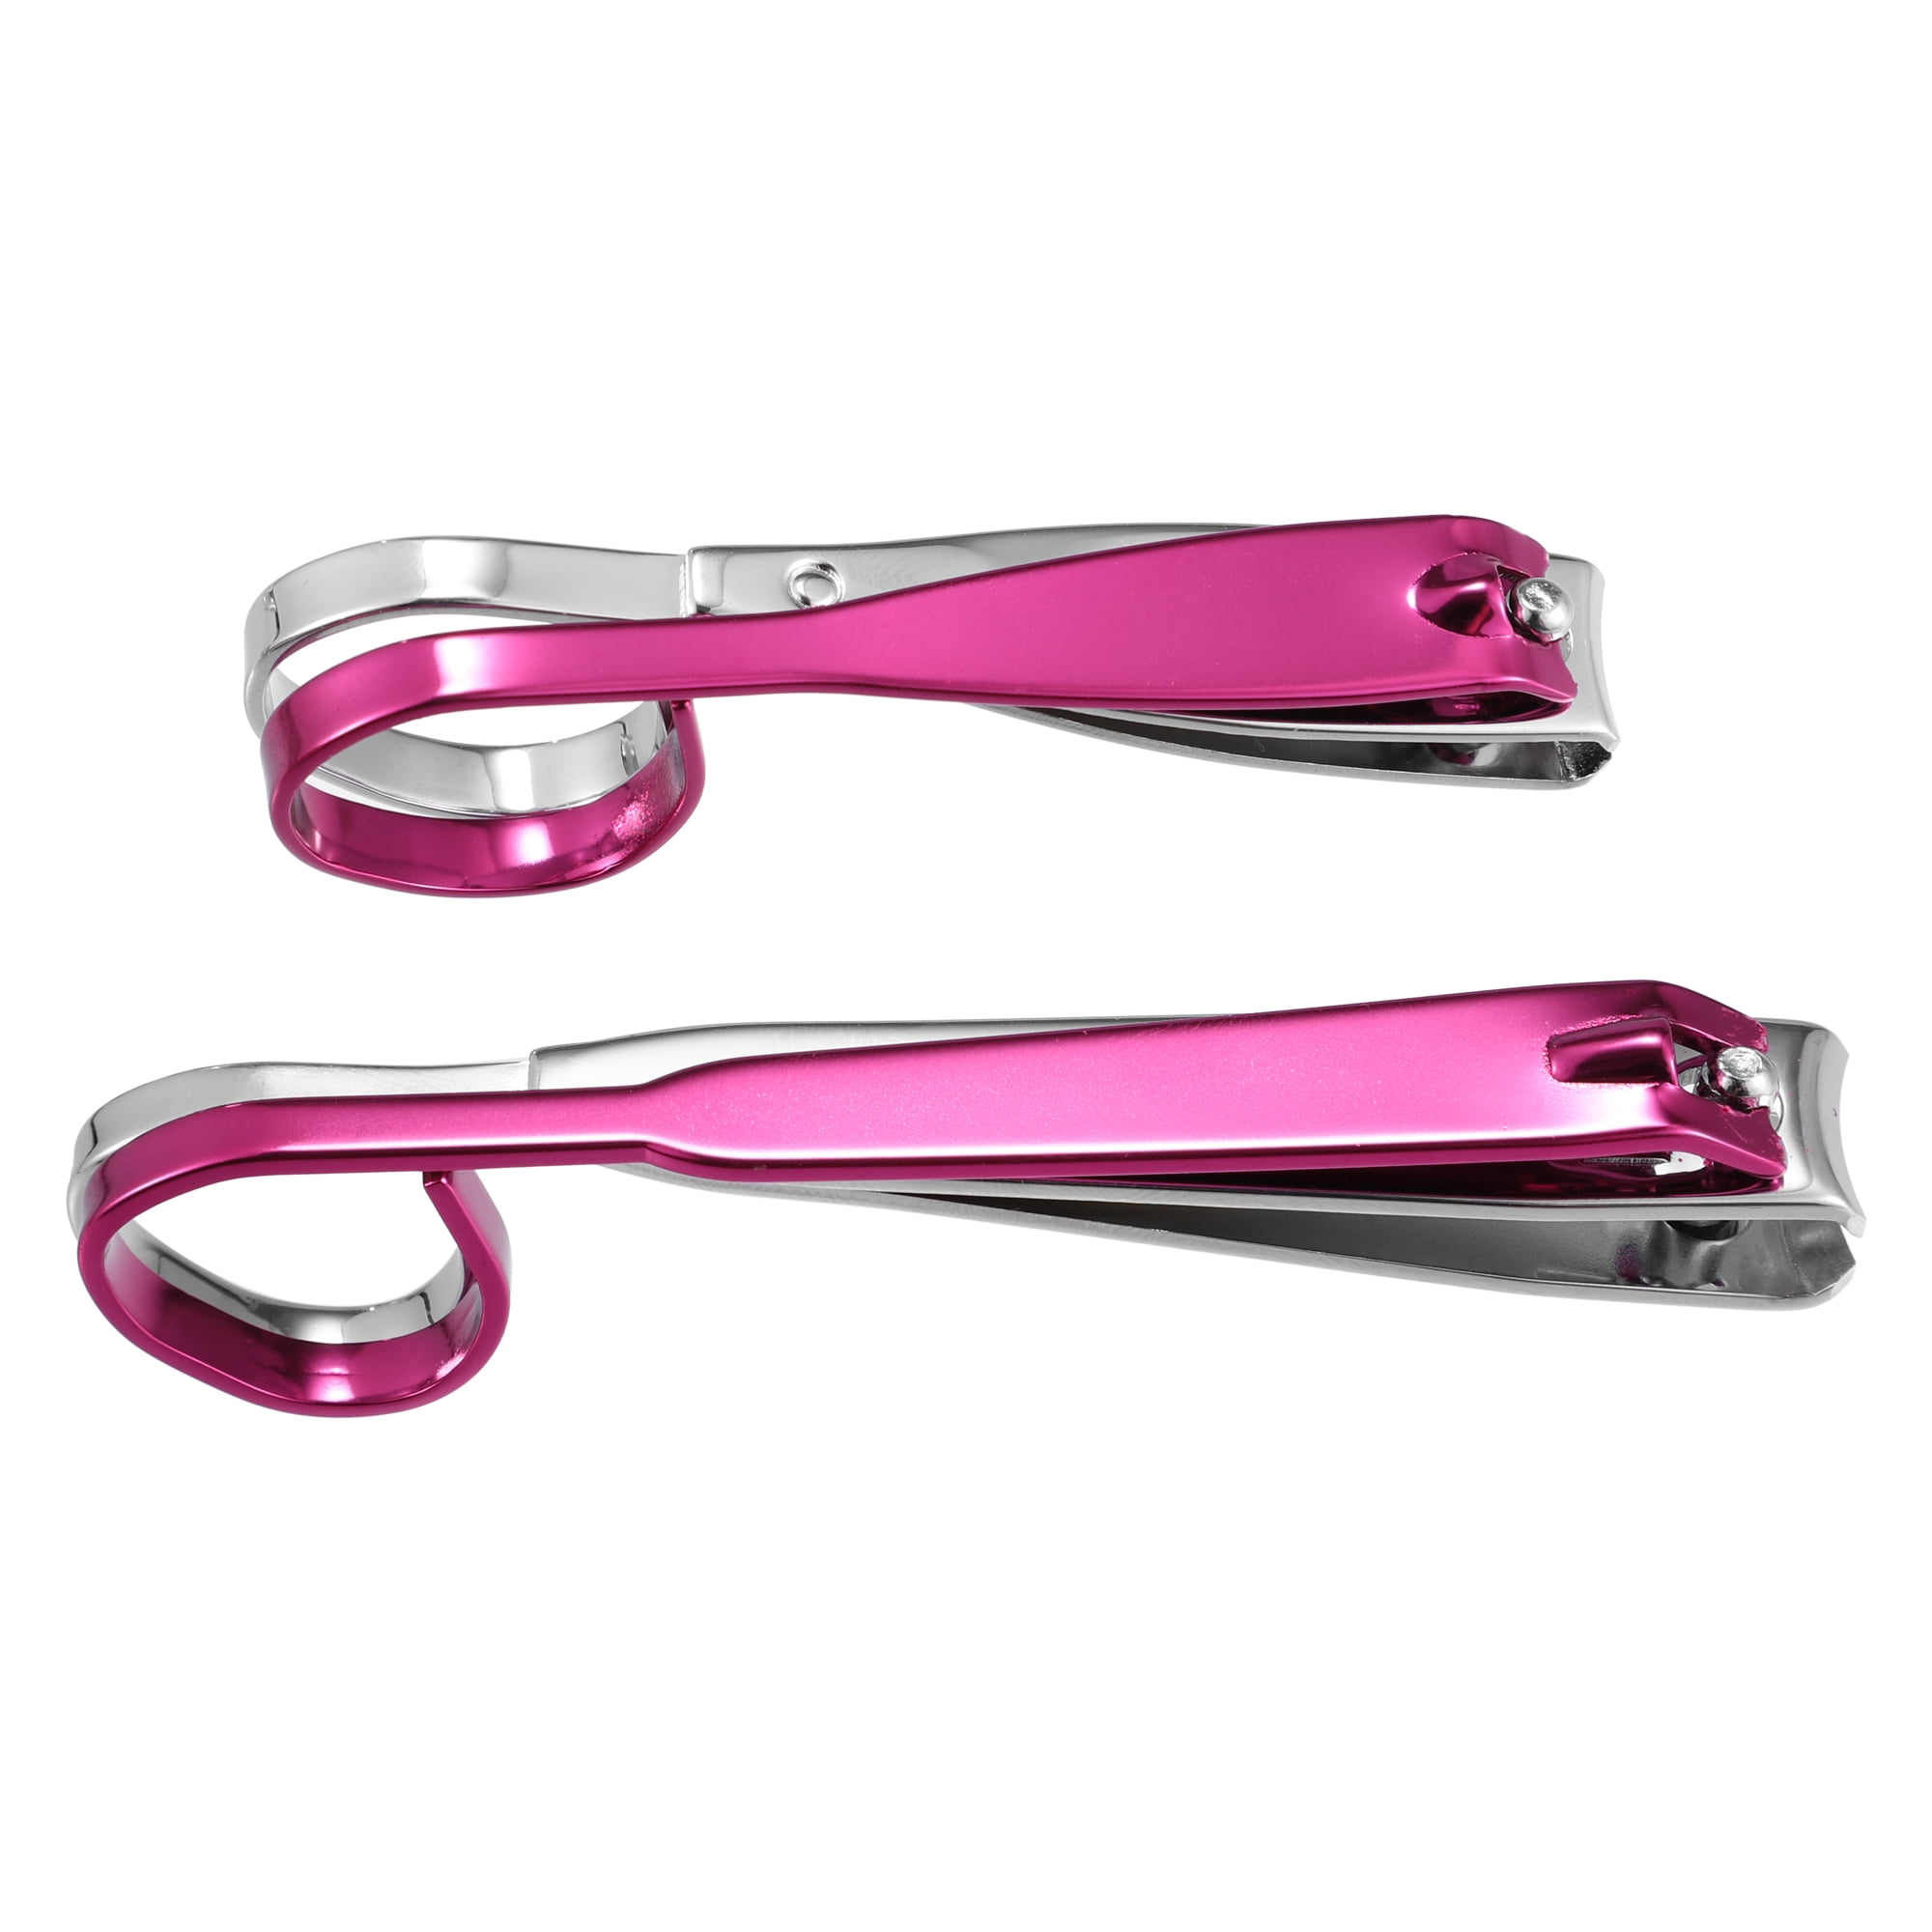 Pinkiou No Splash Nail Clippers Set With Catcher Shell Curved Nail